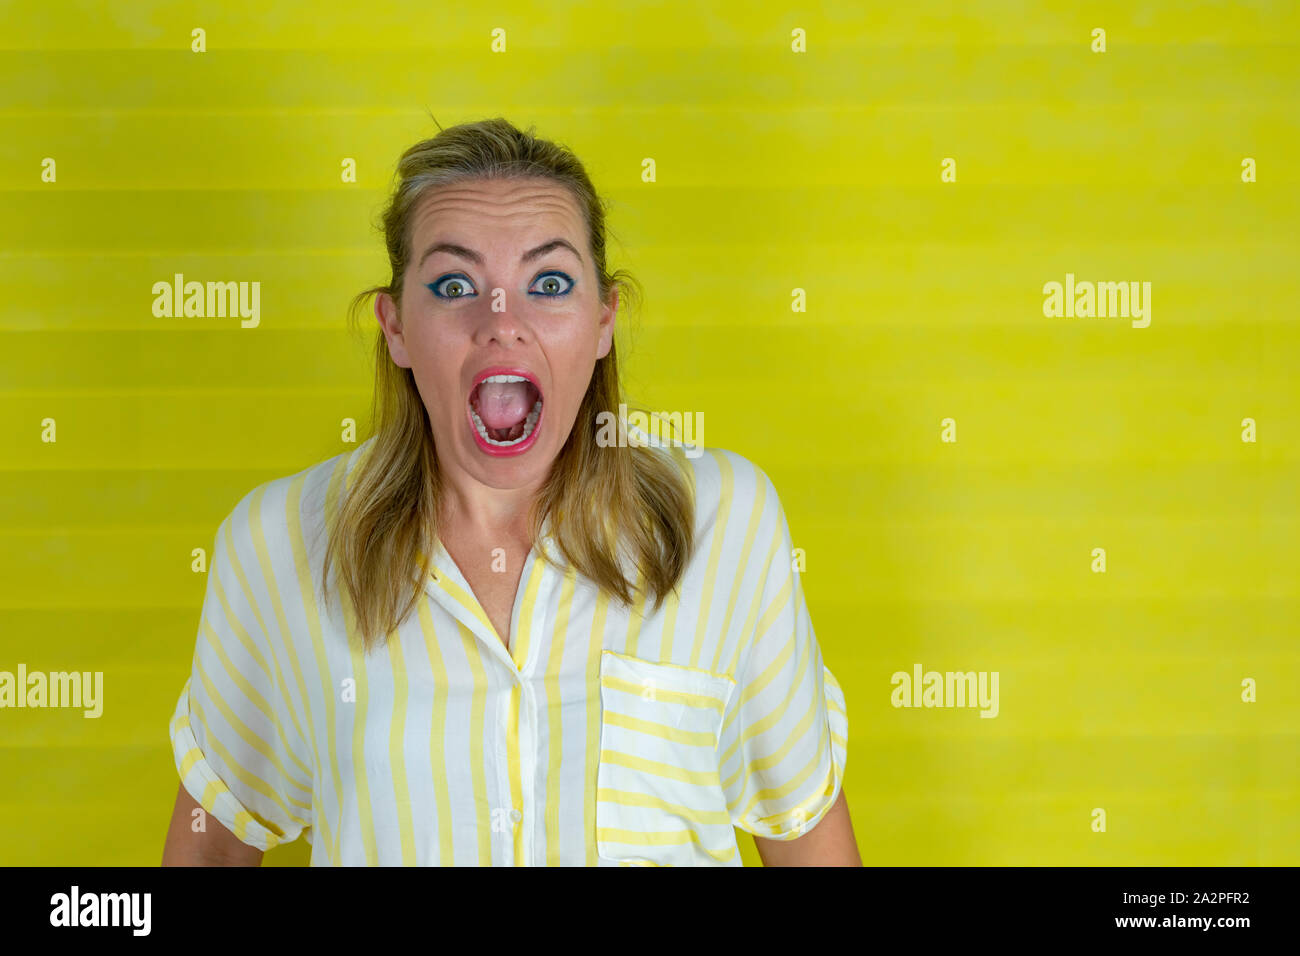 young woman on a yellow background with surprise expression and excited face - image Stock Photo